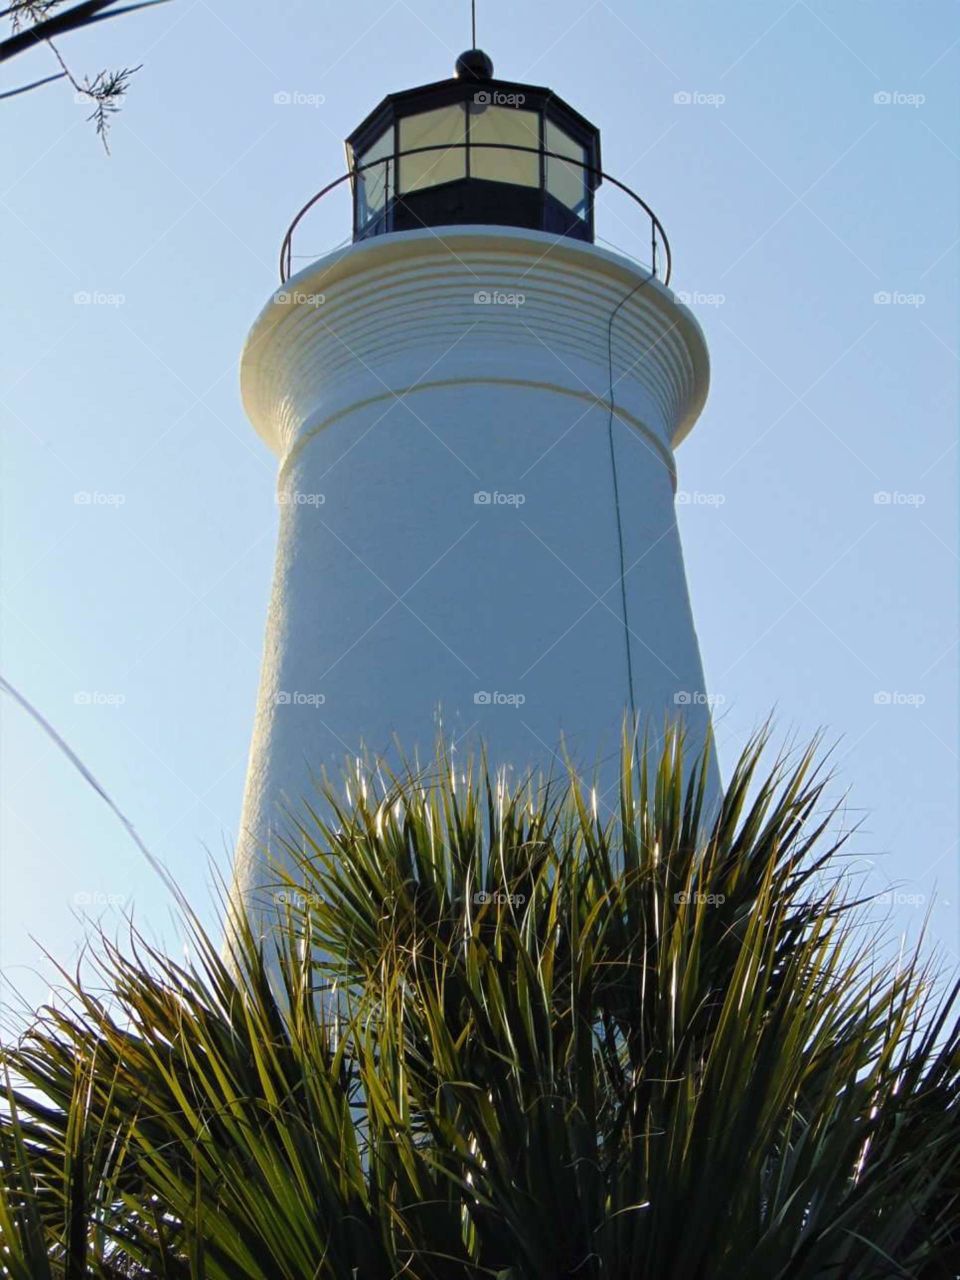 st Mark's lighthouse in Florida